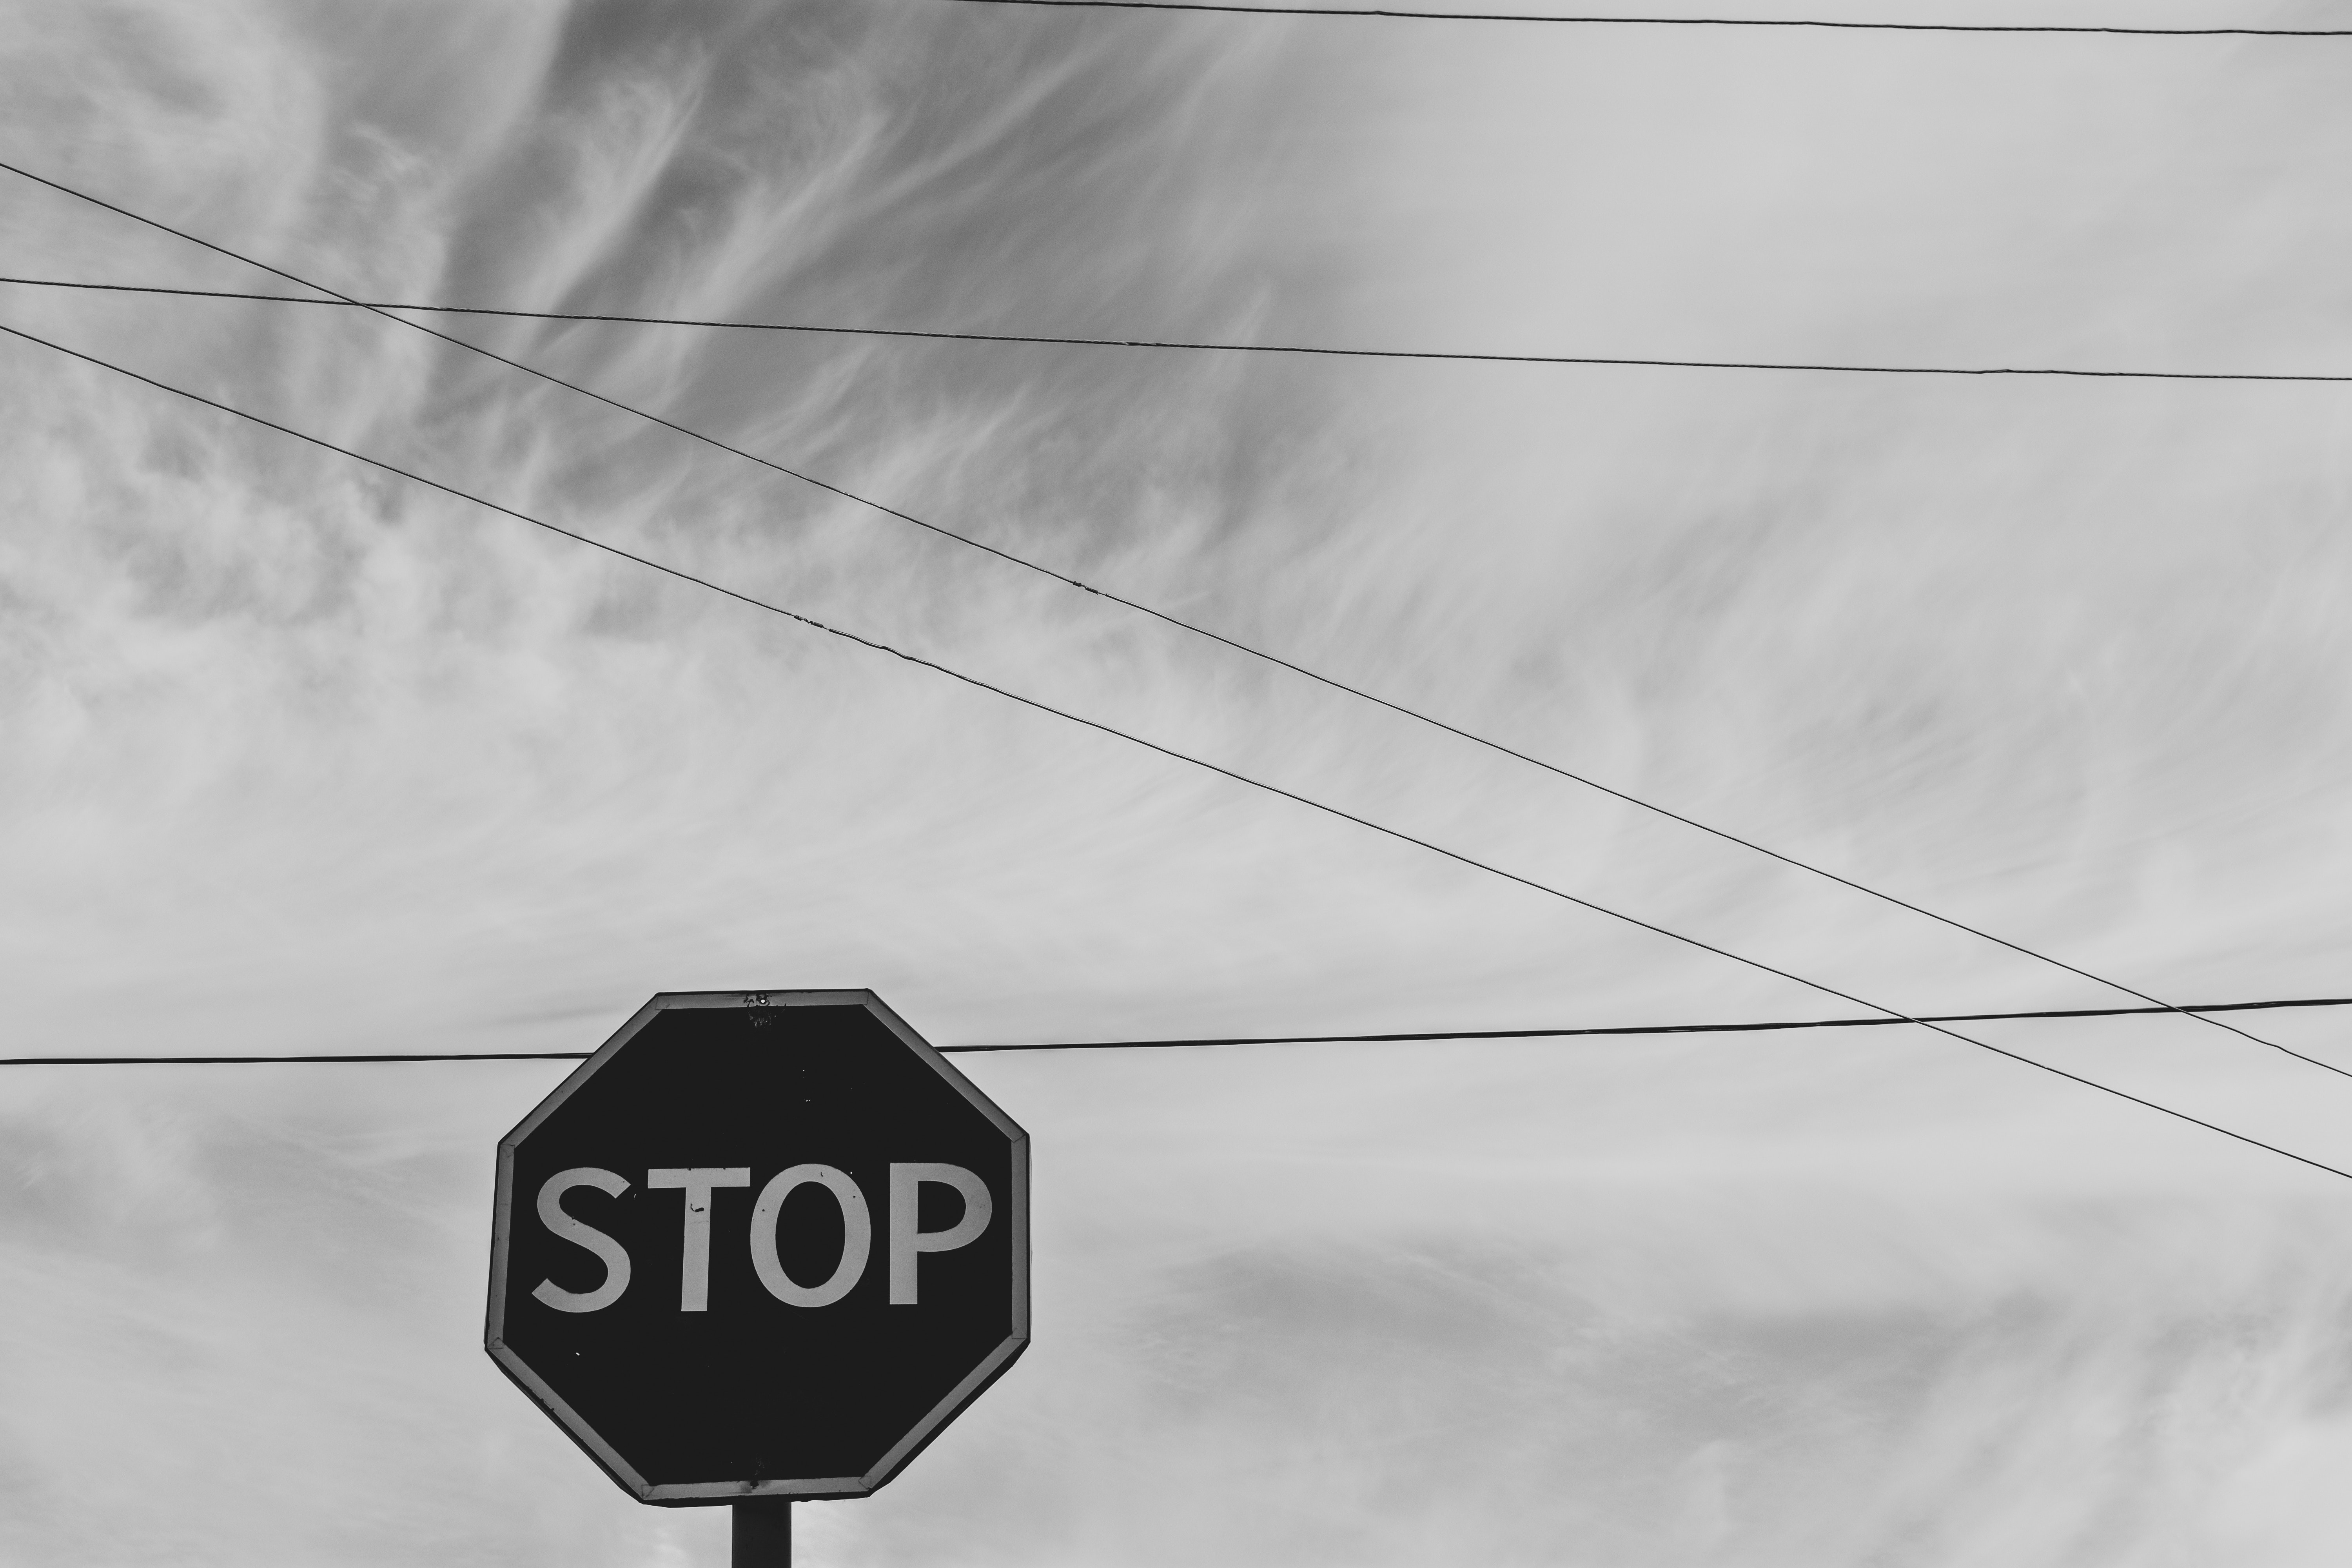 wires, stop, sky, words, bw, chb, sign, wire